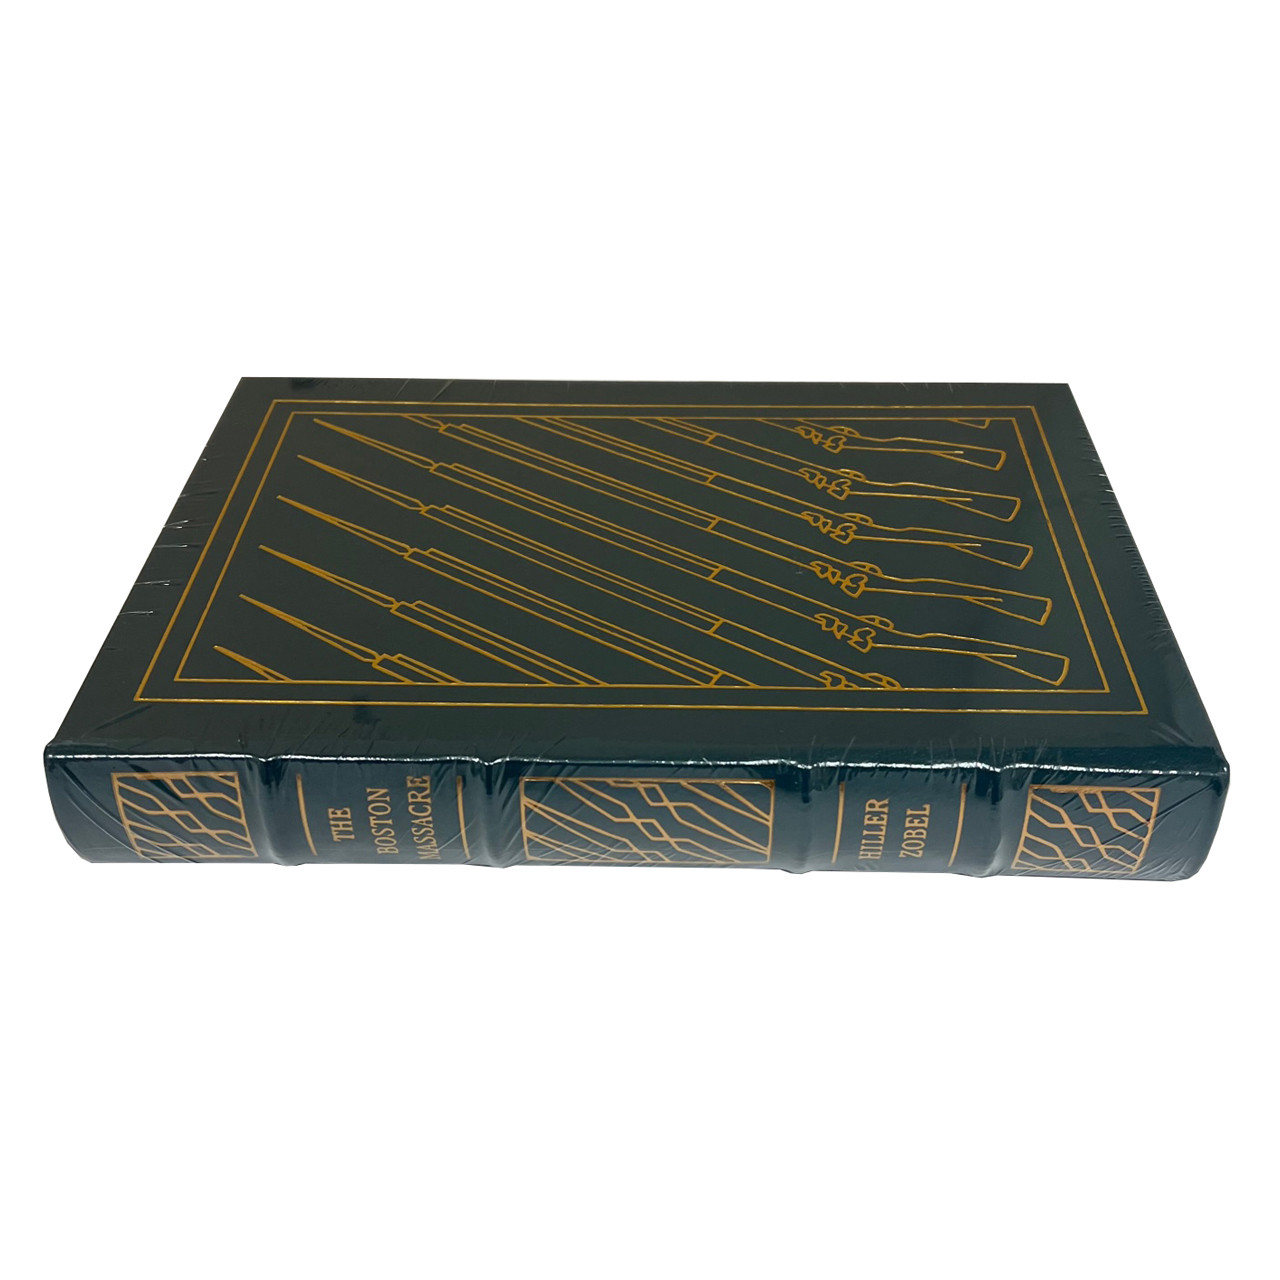 Hiller Zobel "The Boston Massacre" Limited Edition, Leather Bound Collector's Edition [Sealed]